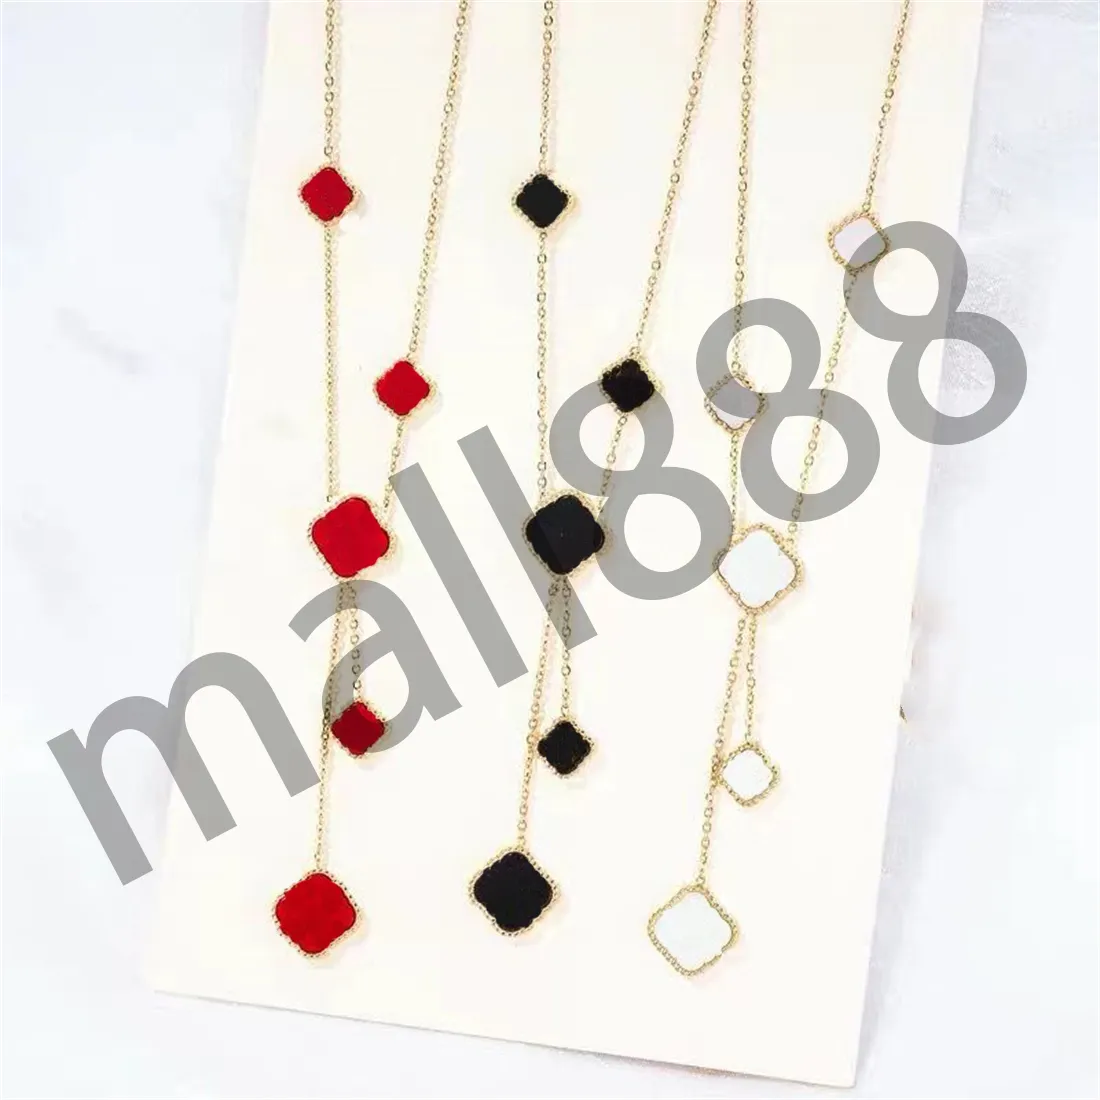 Fashion Pendant Necklaces four leaf clover Big Small Irregular flower necklace for women chains designer design Jewelry choker locket Chain with box